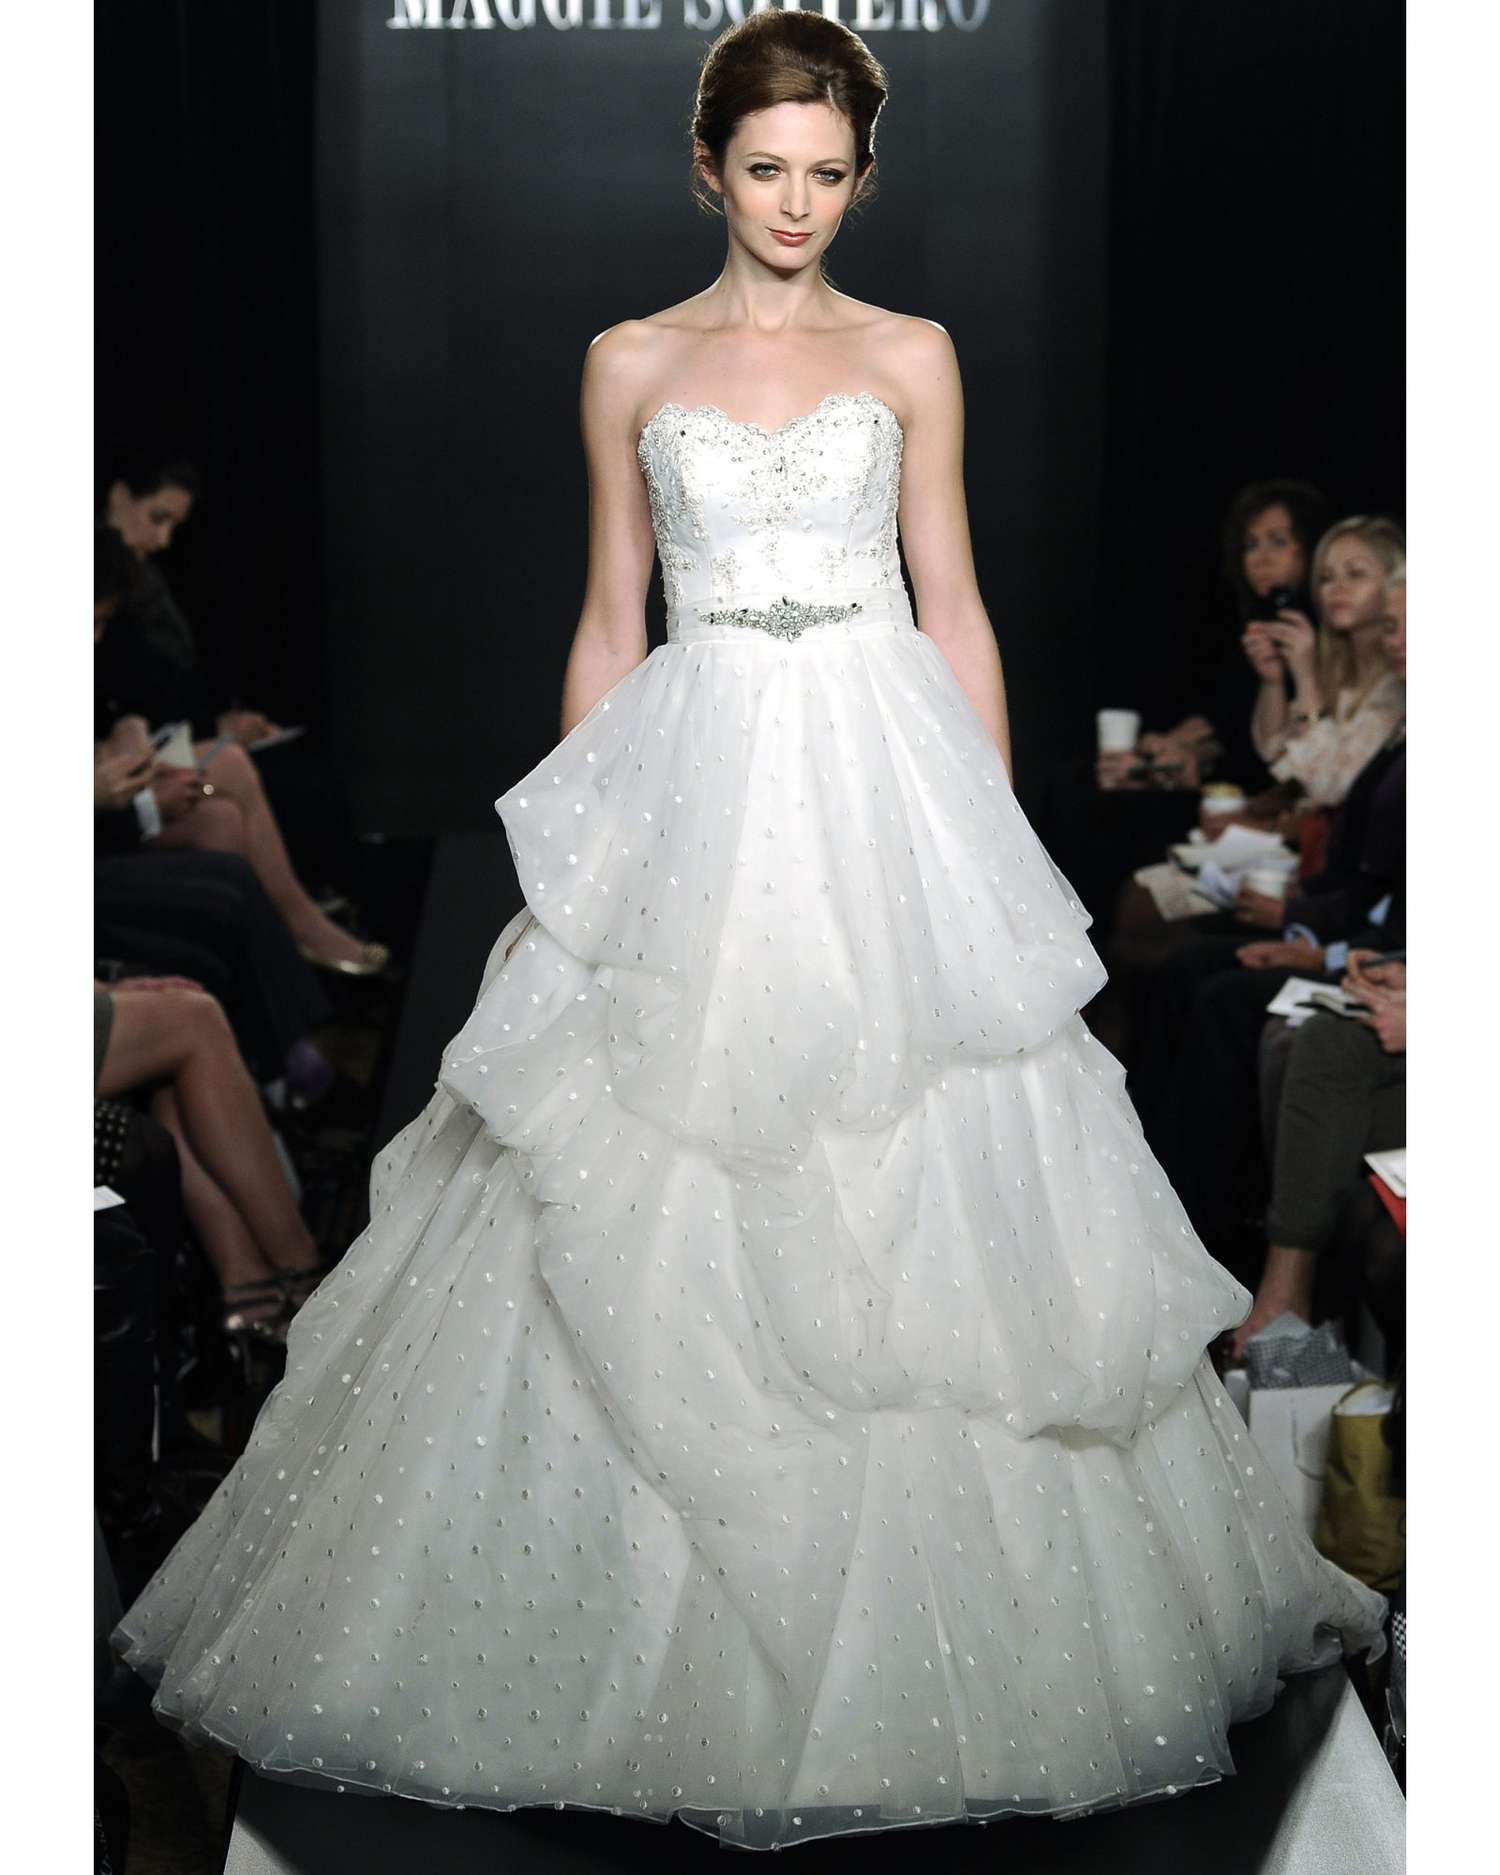 maggie-sottero-fall2012-wd108109_008.jpg